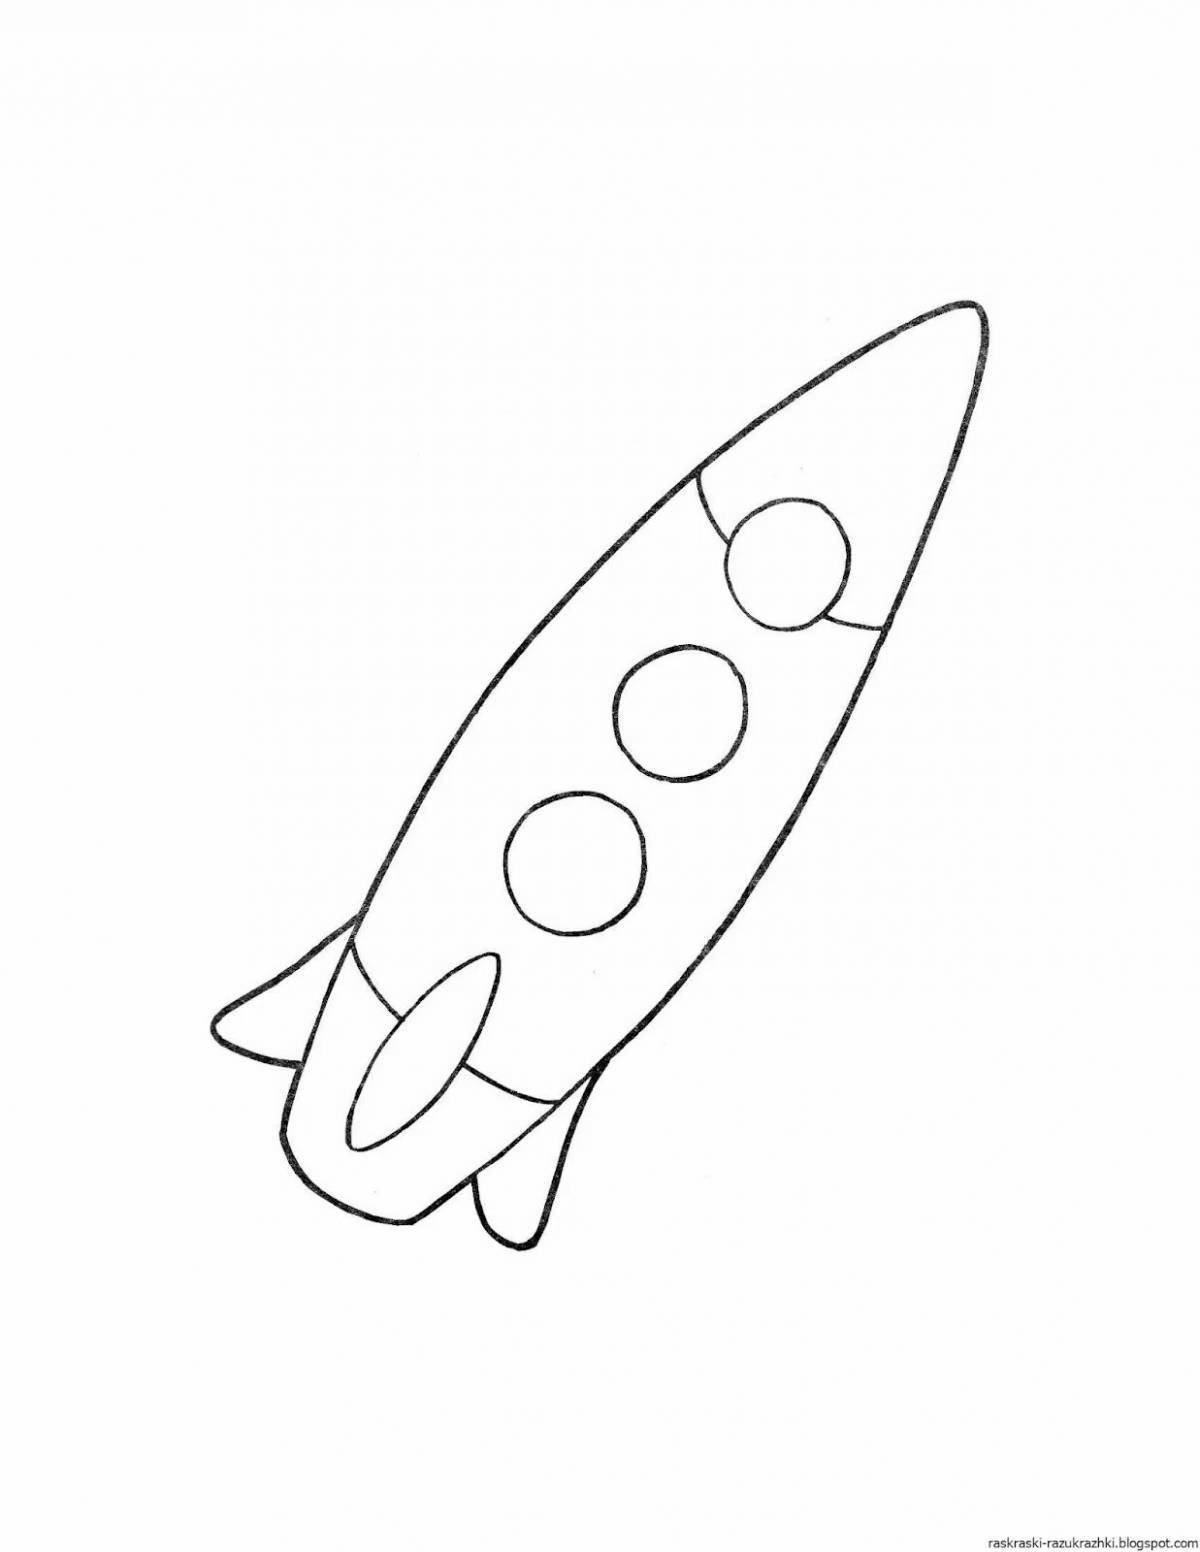 Cute rocket coloring pages for kids